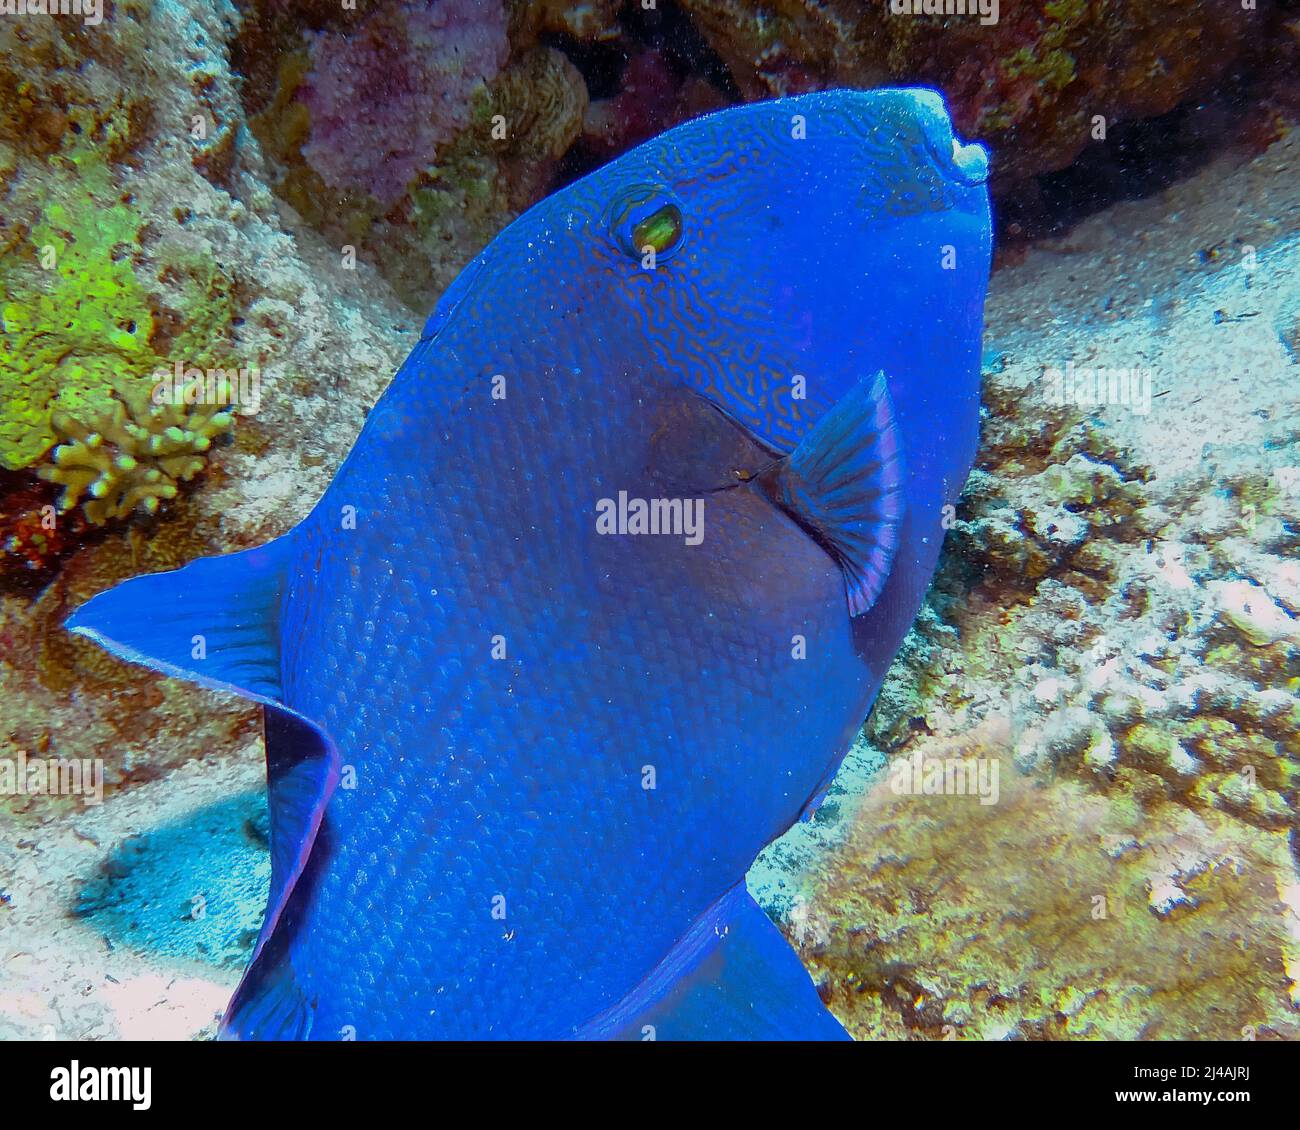 A Blue Triggerfish (Pseudobalistes fuscus) in the Red Sea, Egypt Stock Photo